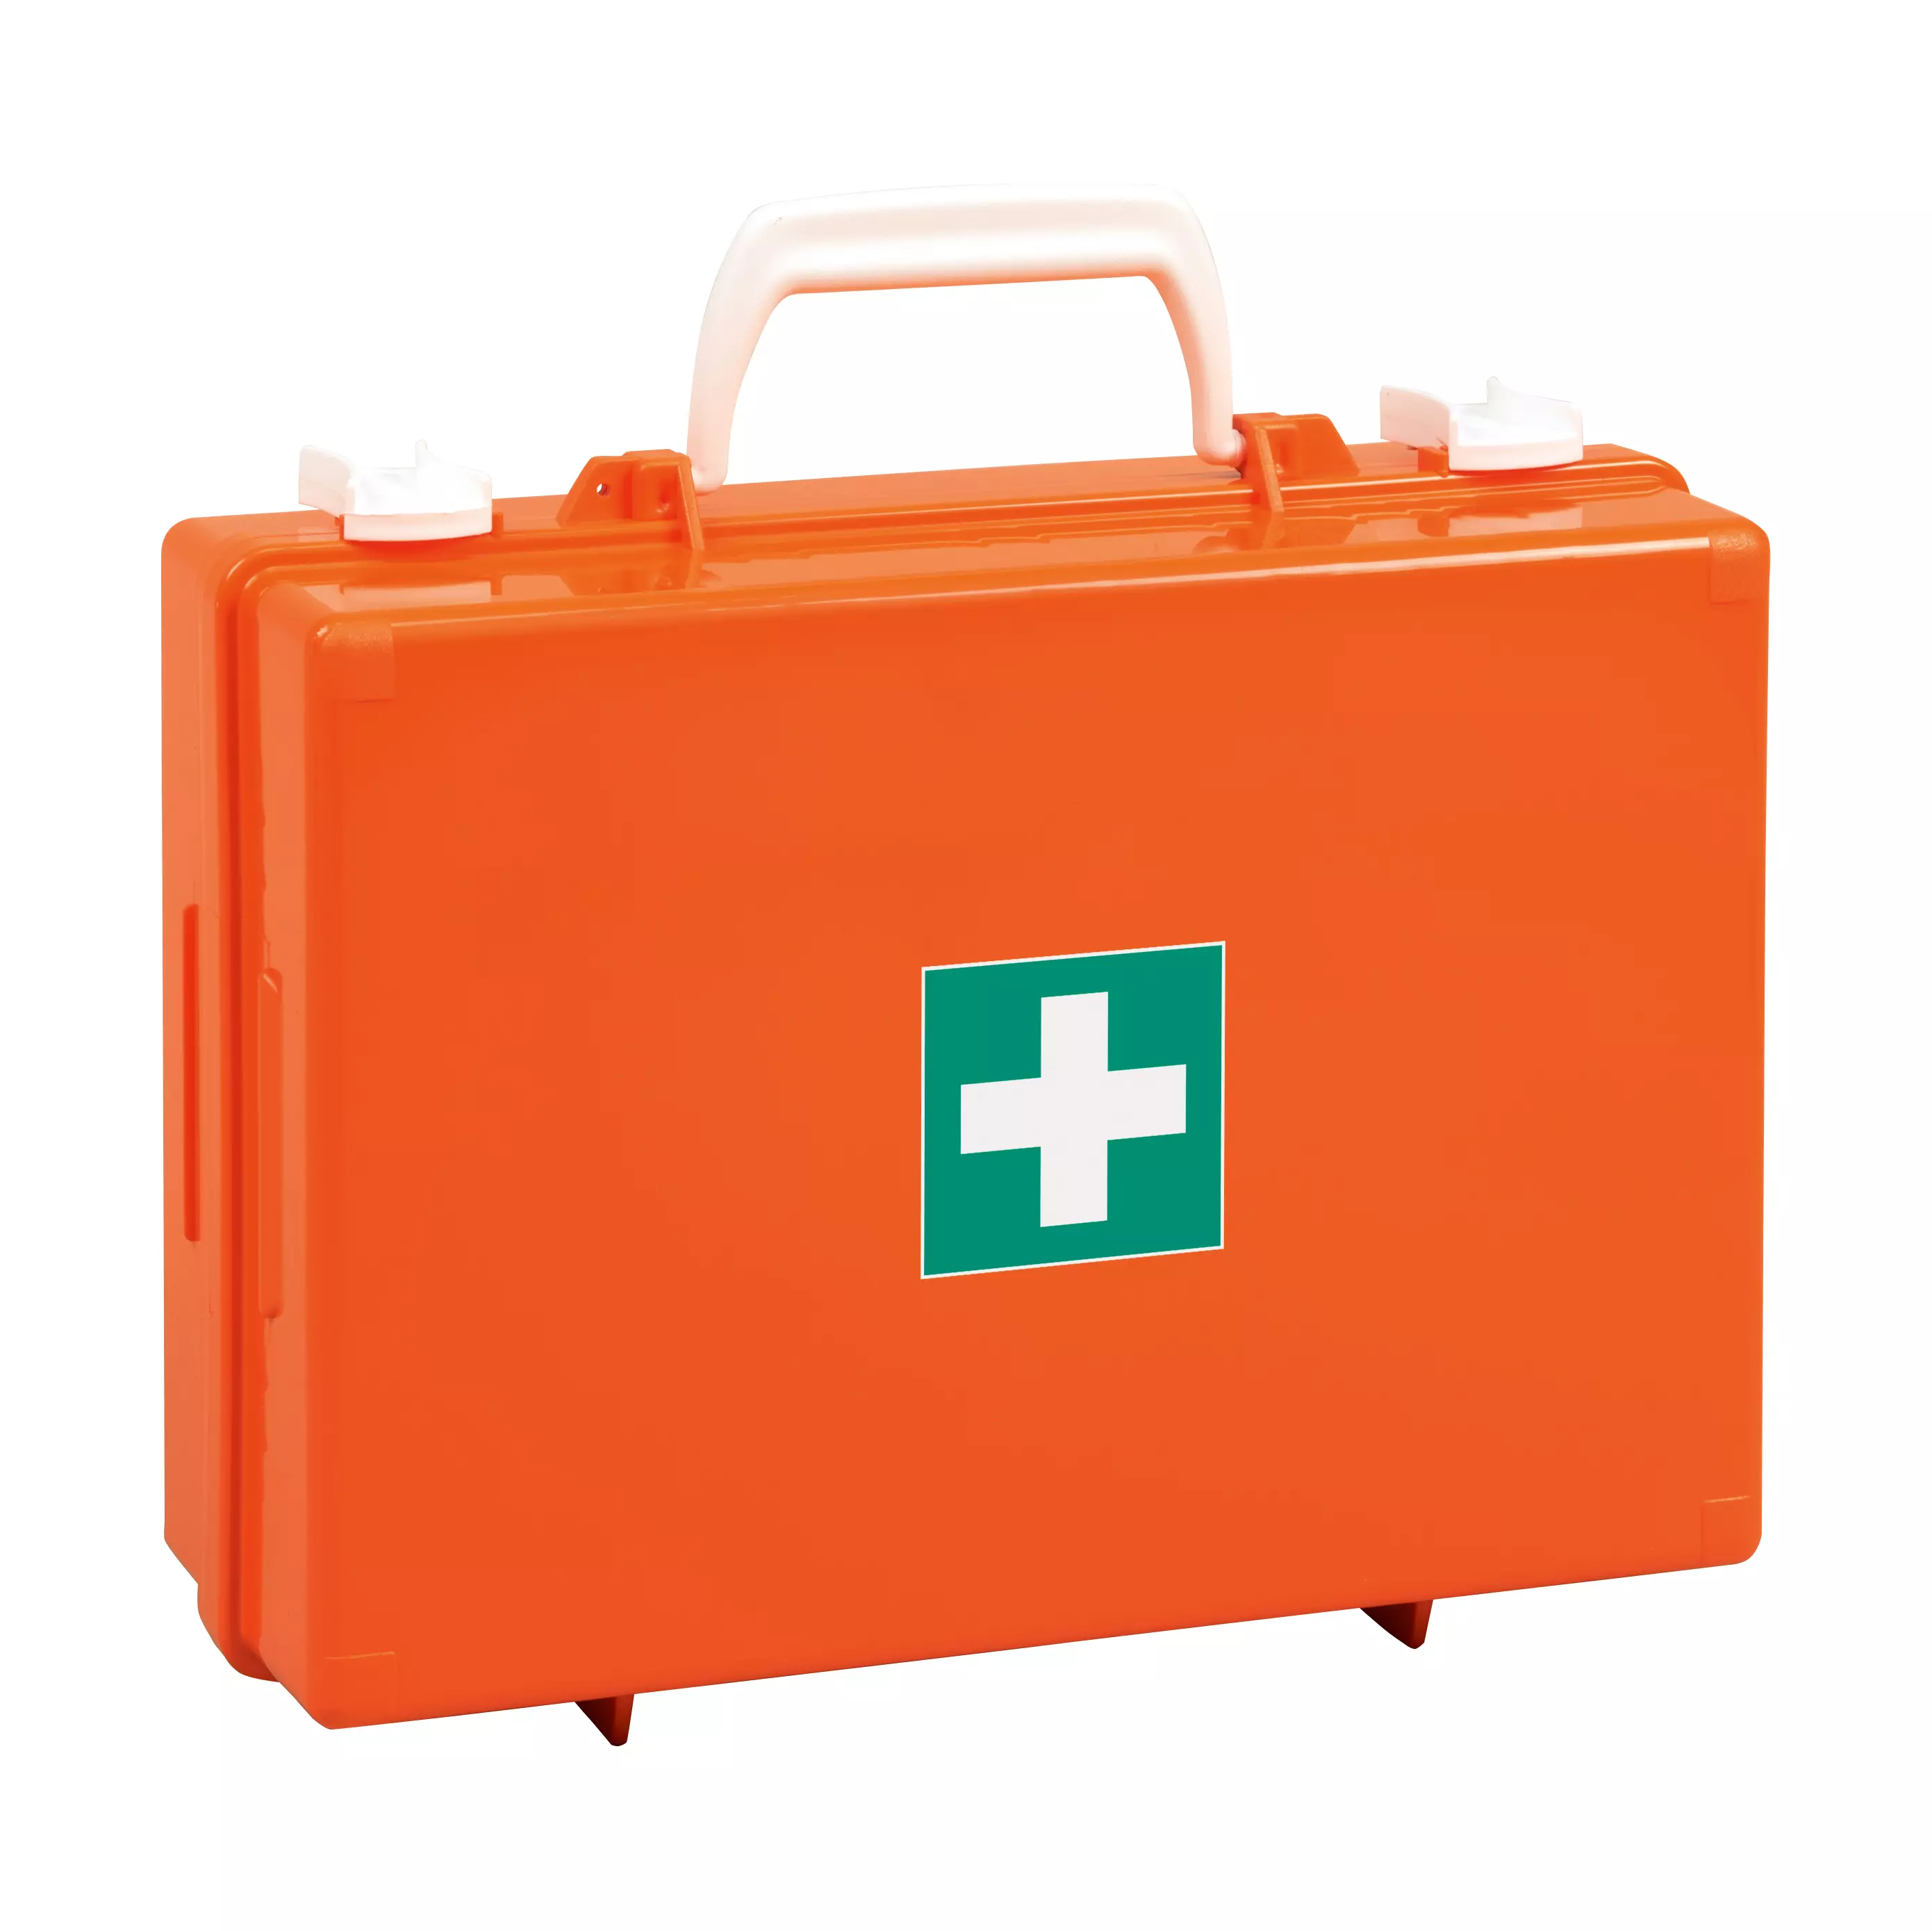 Werotop® First aid kit 350 with wall bracket and 90° locking mechanism, empty - with internal dividers, orange